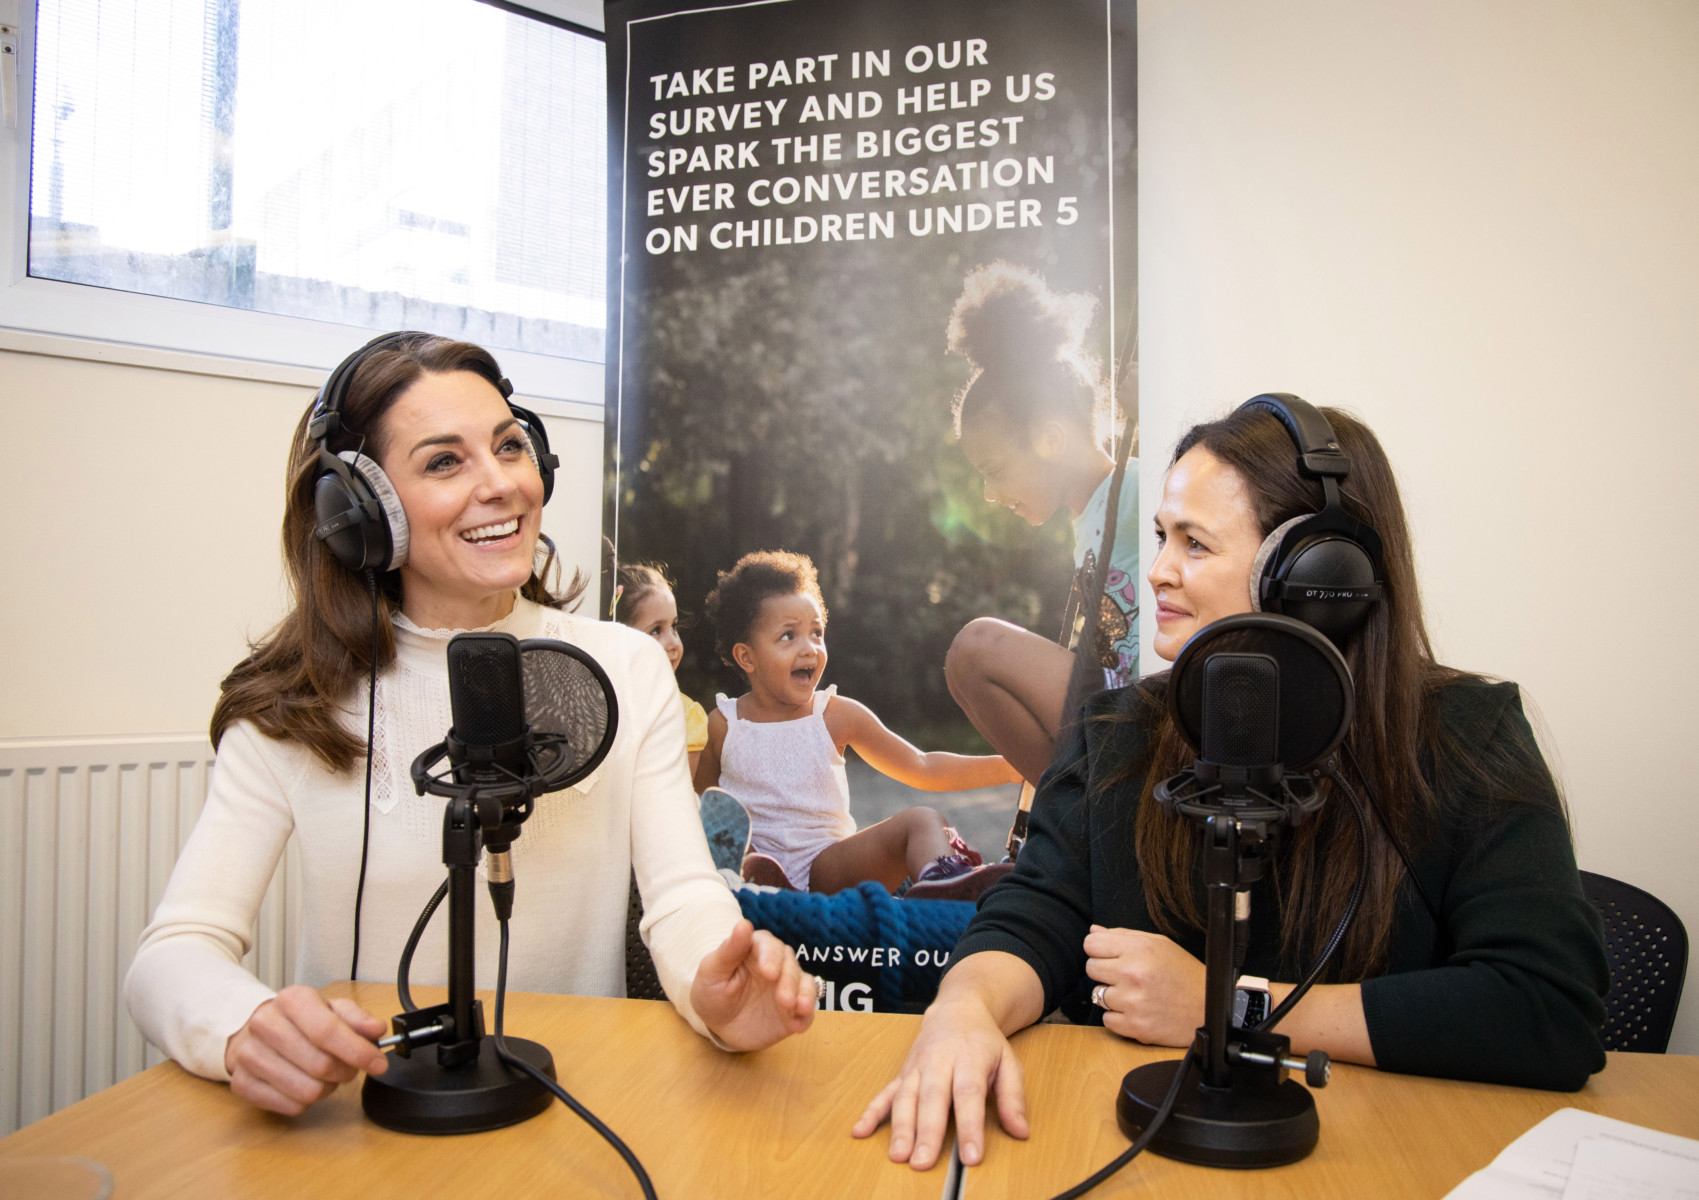 Kate told podcaster Giovanna Fletcher about her childhood to promote her 5 Big Questions for the Under Fives online survey